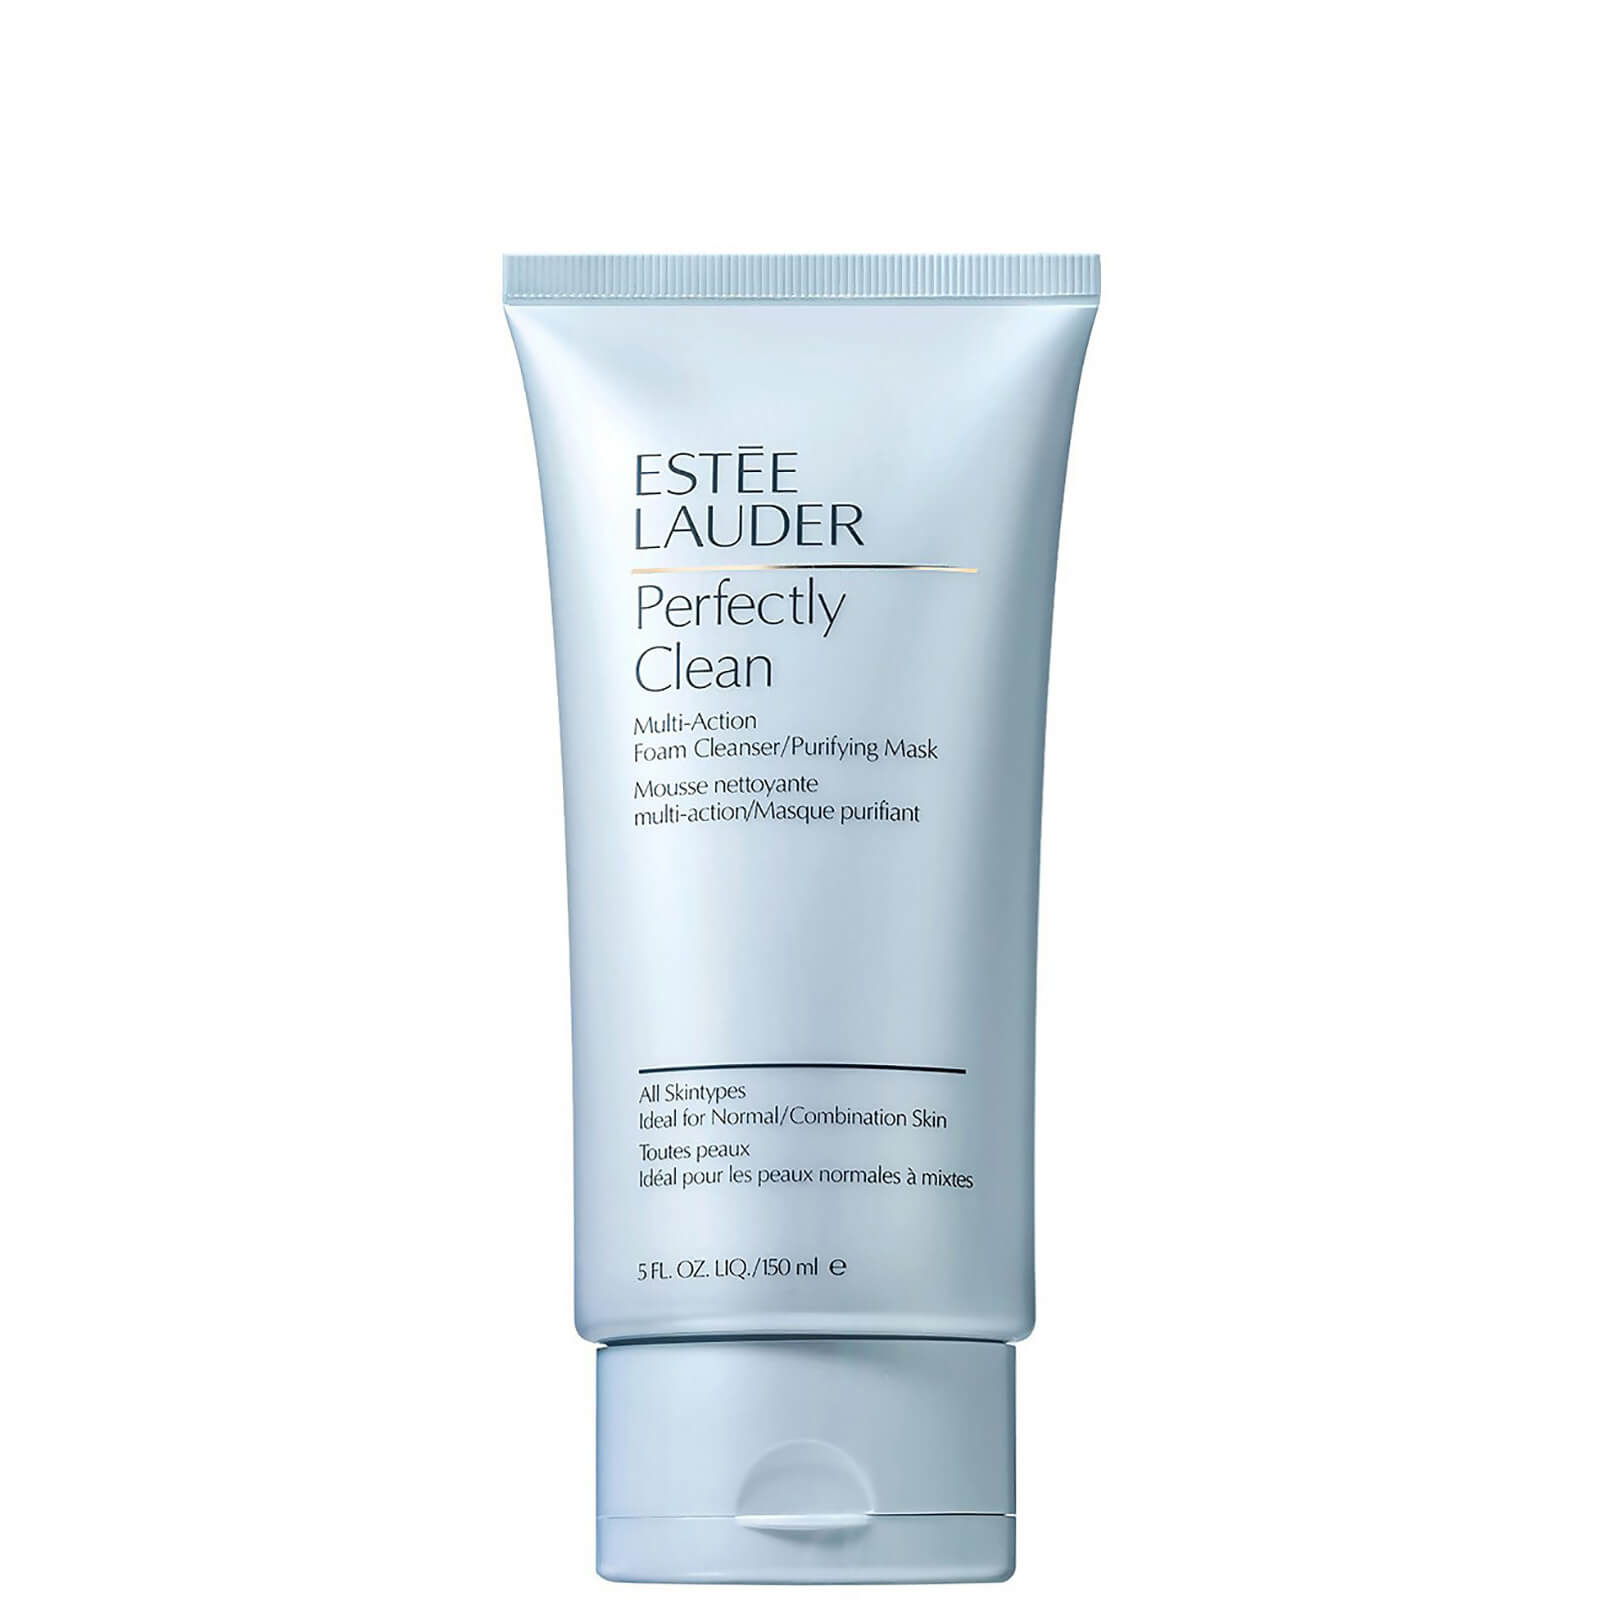 Estee Lauder Perfectly Clean MultiAction Foam Cleanser and Purifying Mask 150ml